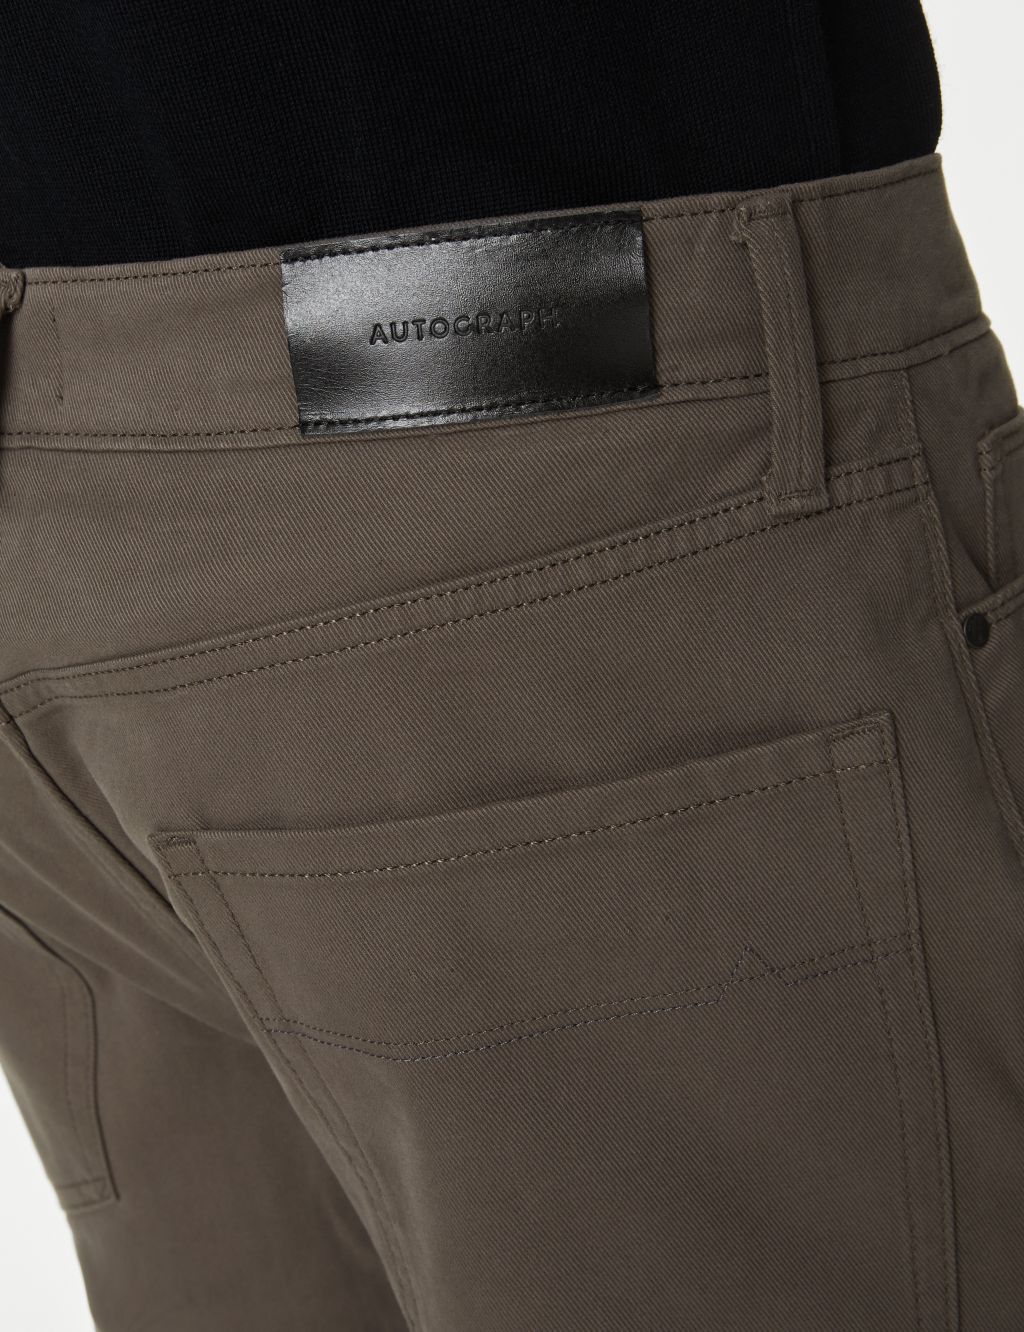 Straight Fit Italian 5 Pocket Trousers image 4